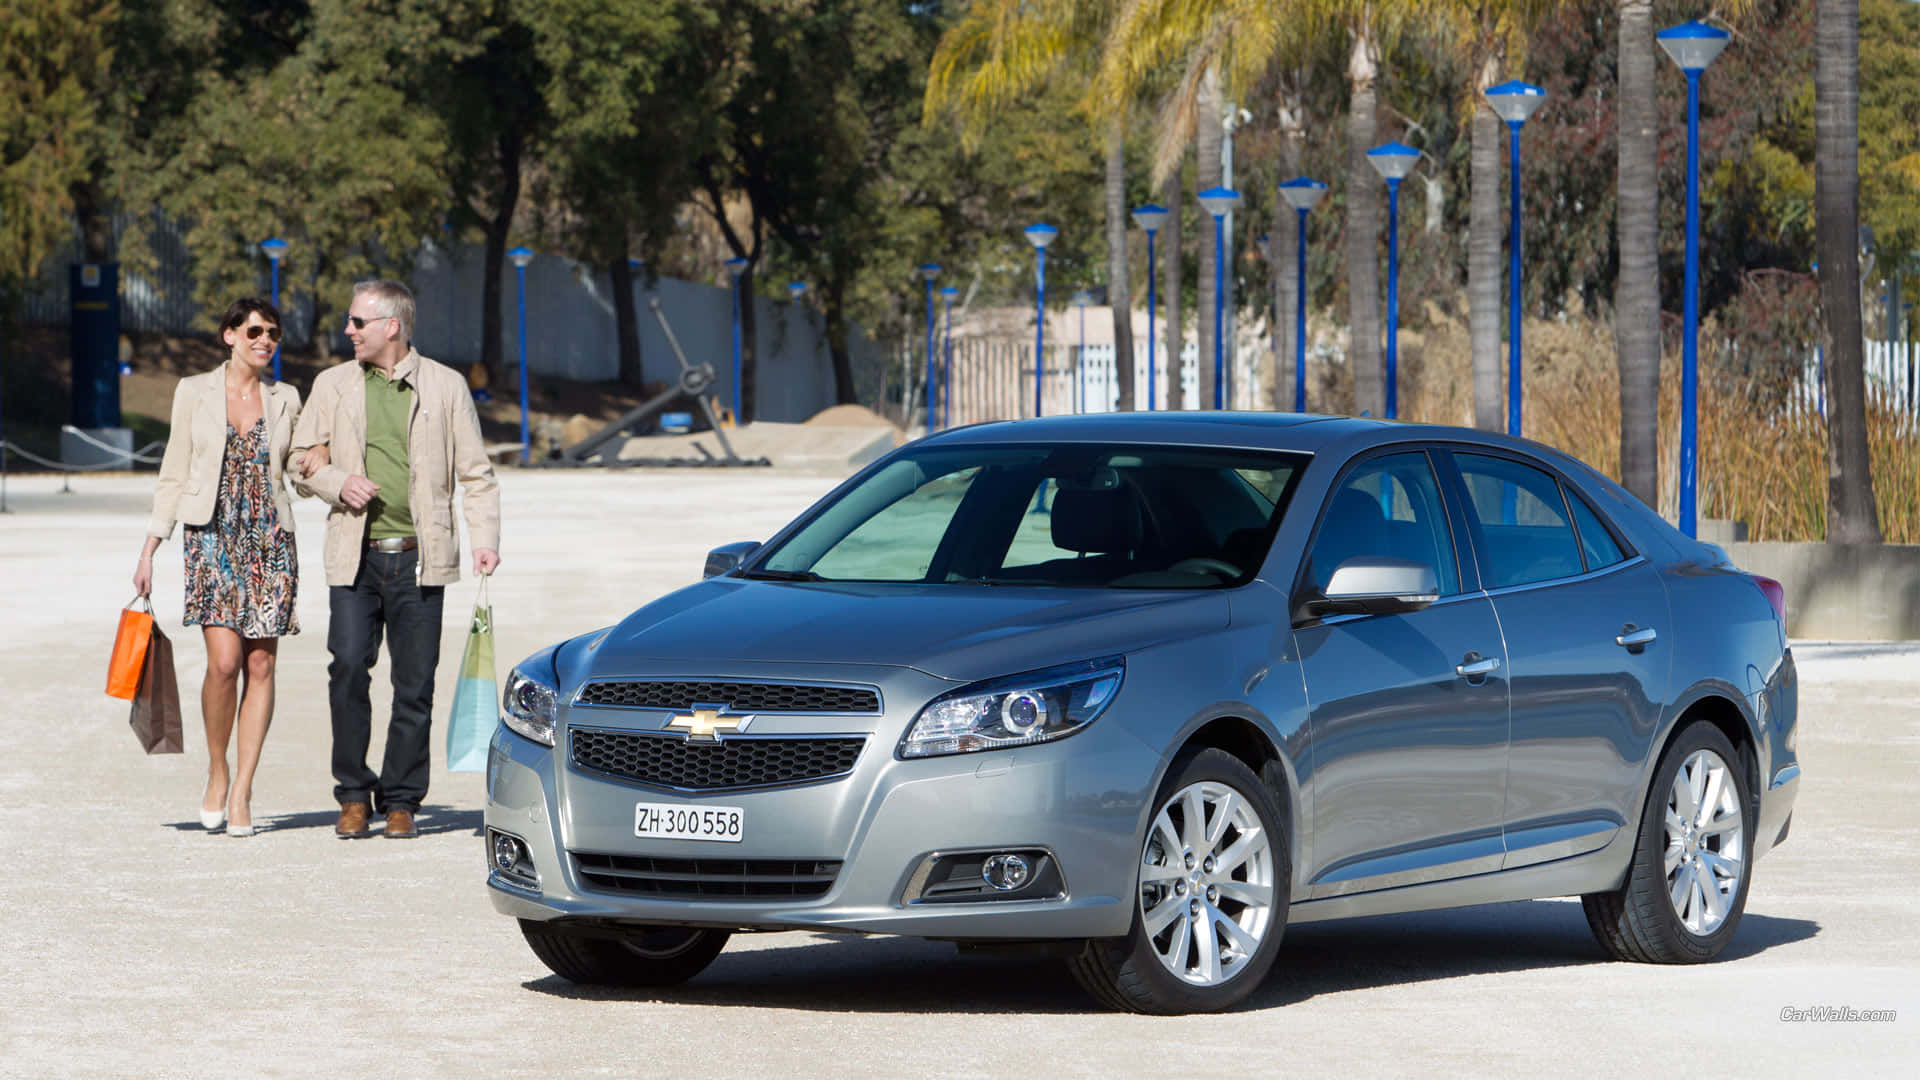 Cruise the Streets in Style with a Chevy Malibu Wallpaper